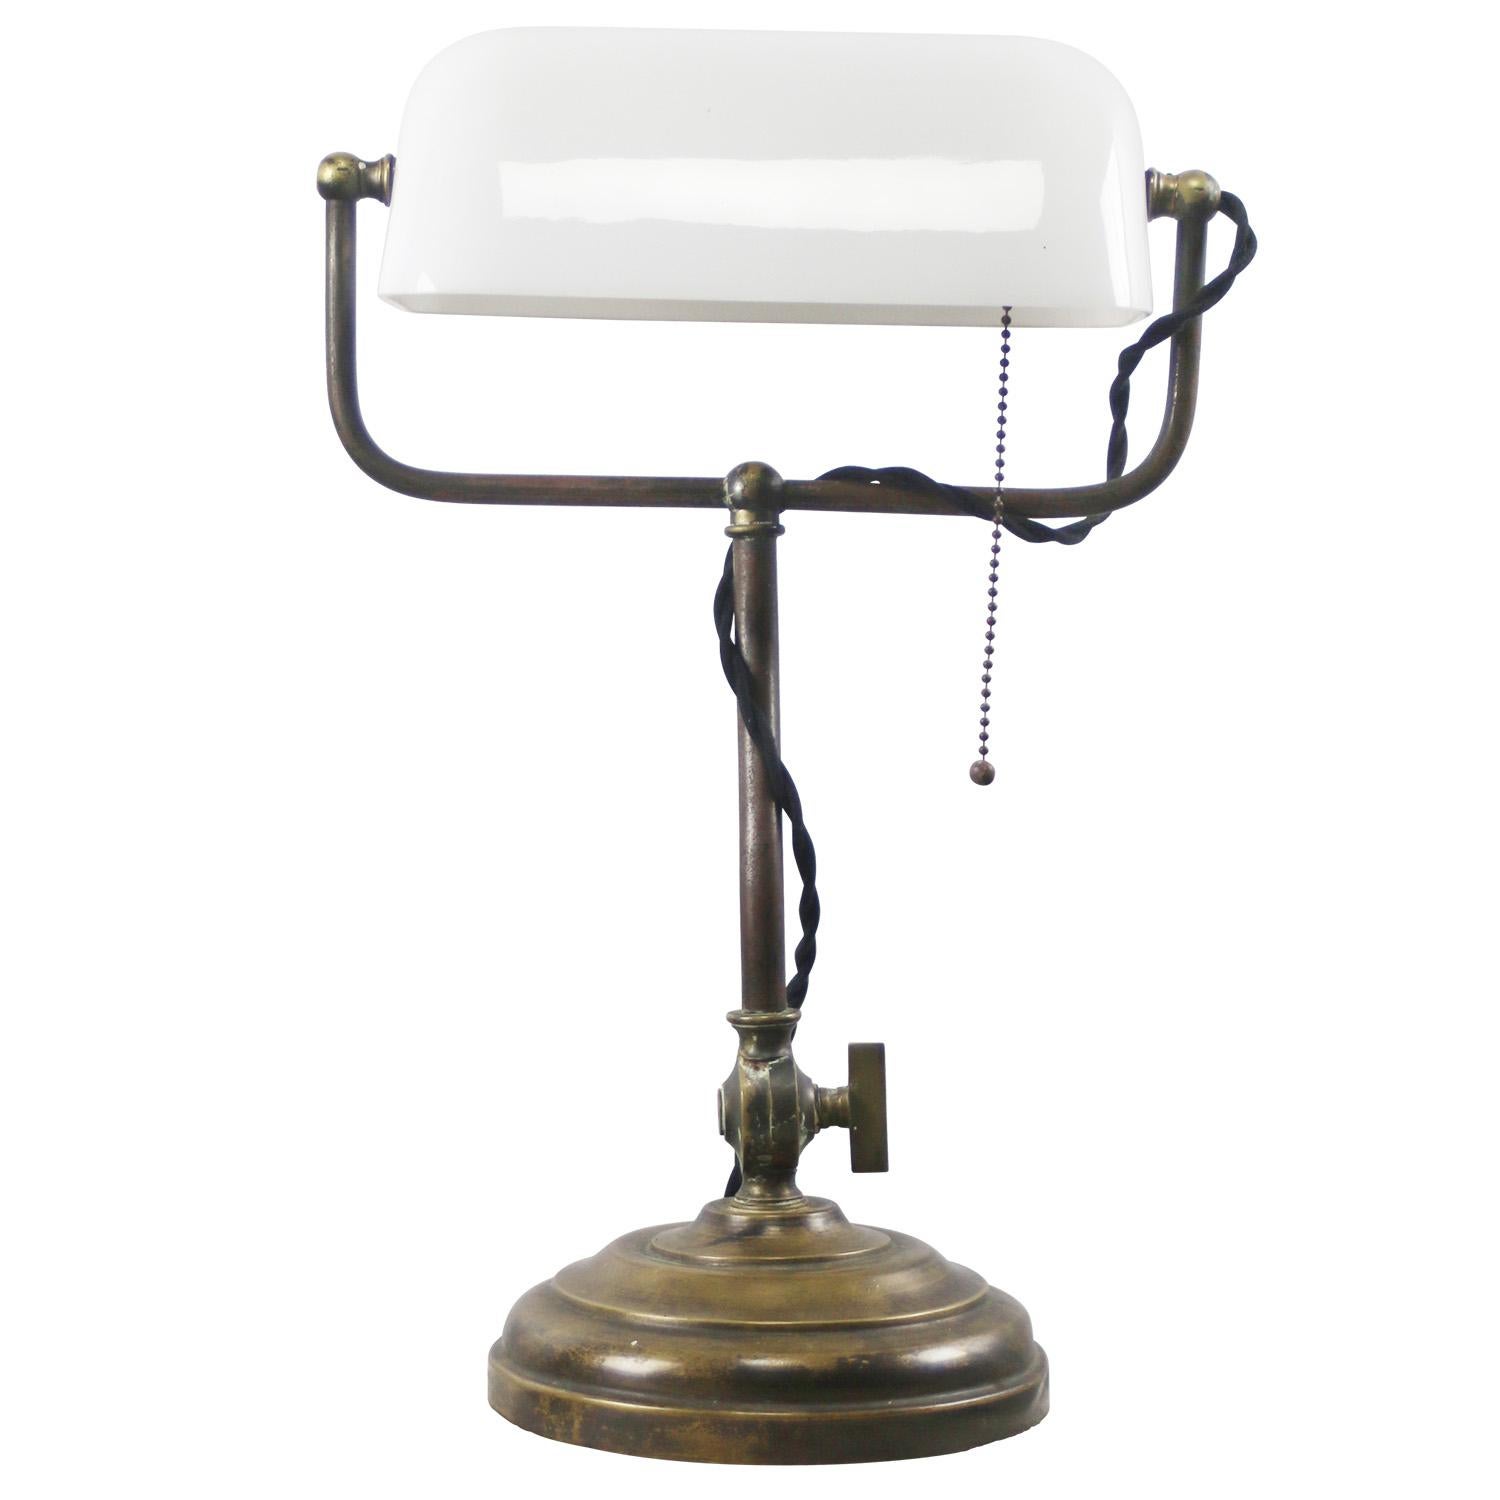 White opaline glass, brass desk light / banker's lamp
2,5 meter black cotton flex, plug and switch in shade

Available with UK / US plug

Weight: 3.00 kg / 6.6 lb

Priced per individual item. All lamps have been made suitable by international